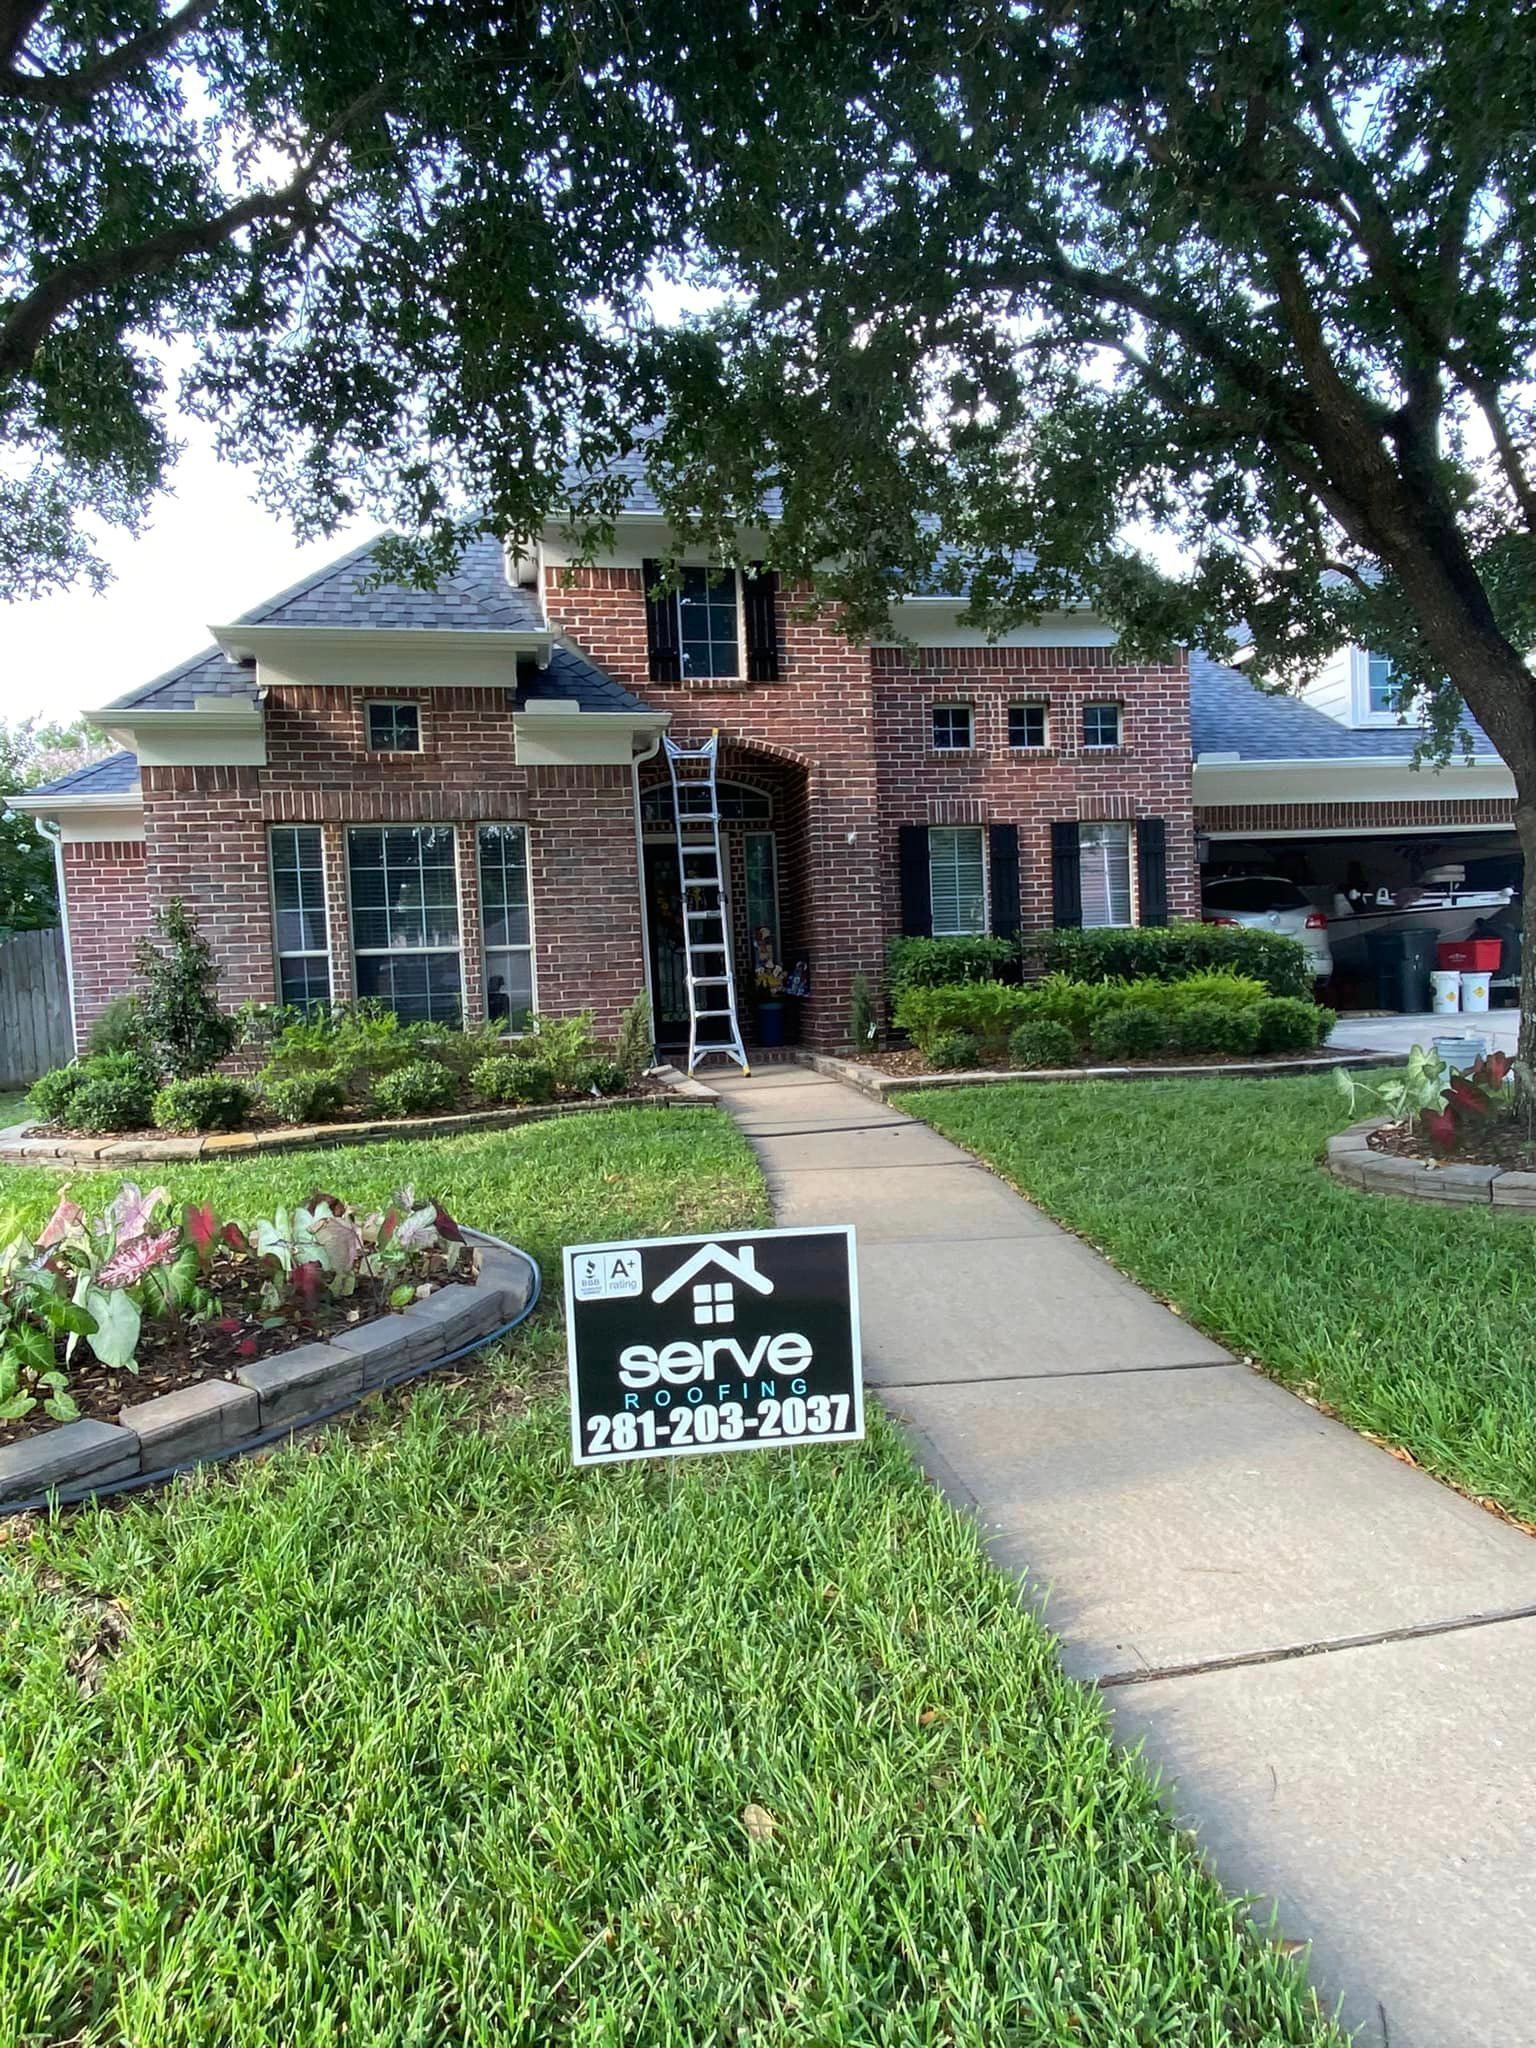 A house with a sign on the sidewalk in front of it.